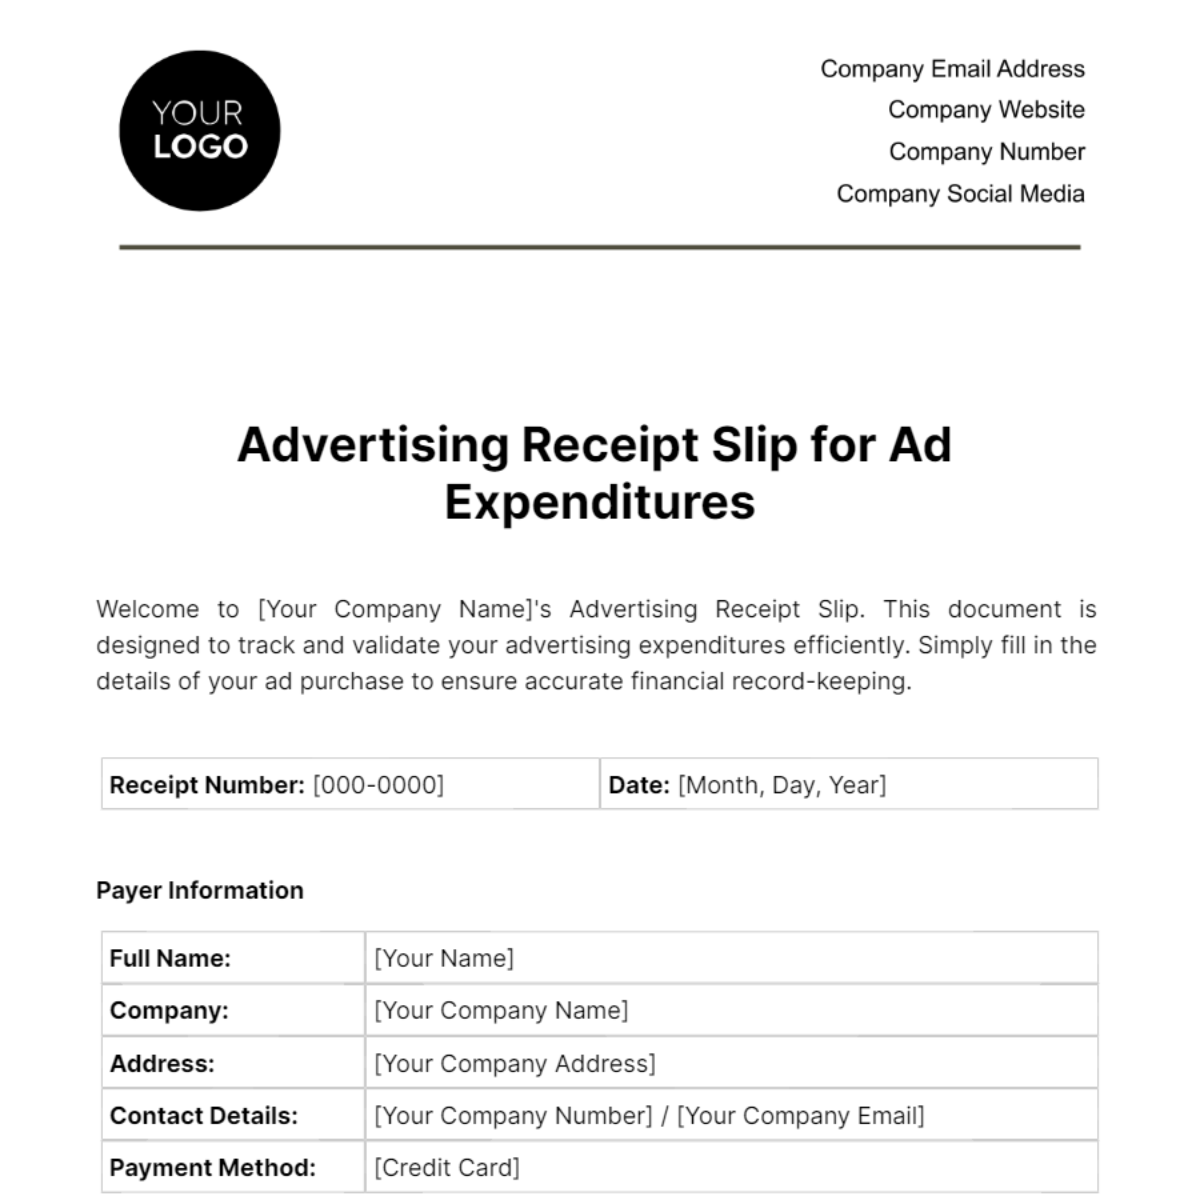 Advertising Receipt Slip for Ad Expenditures Template